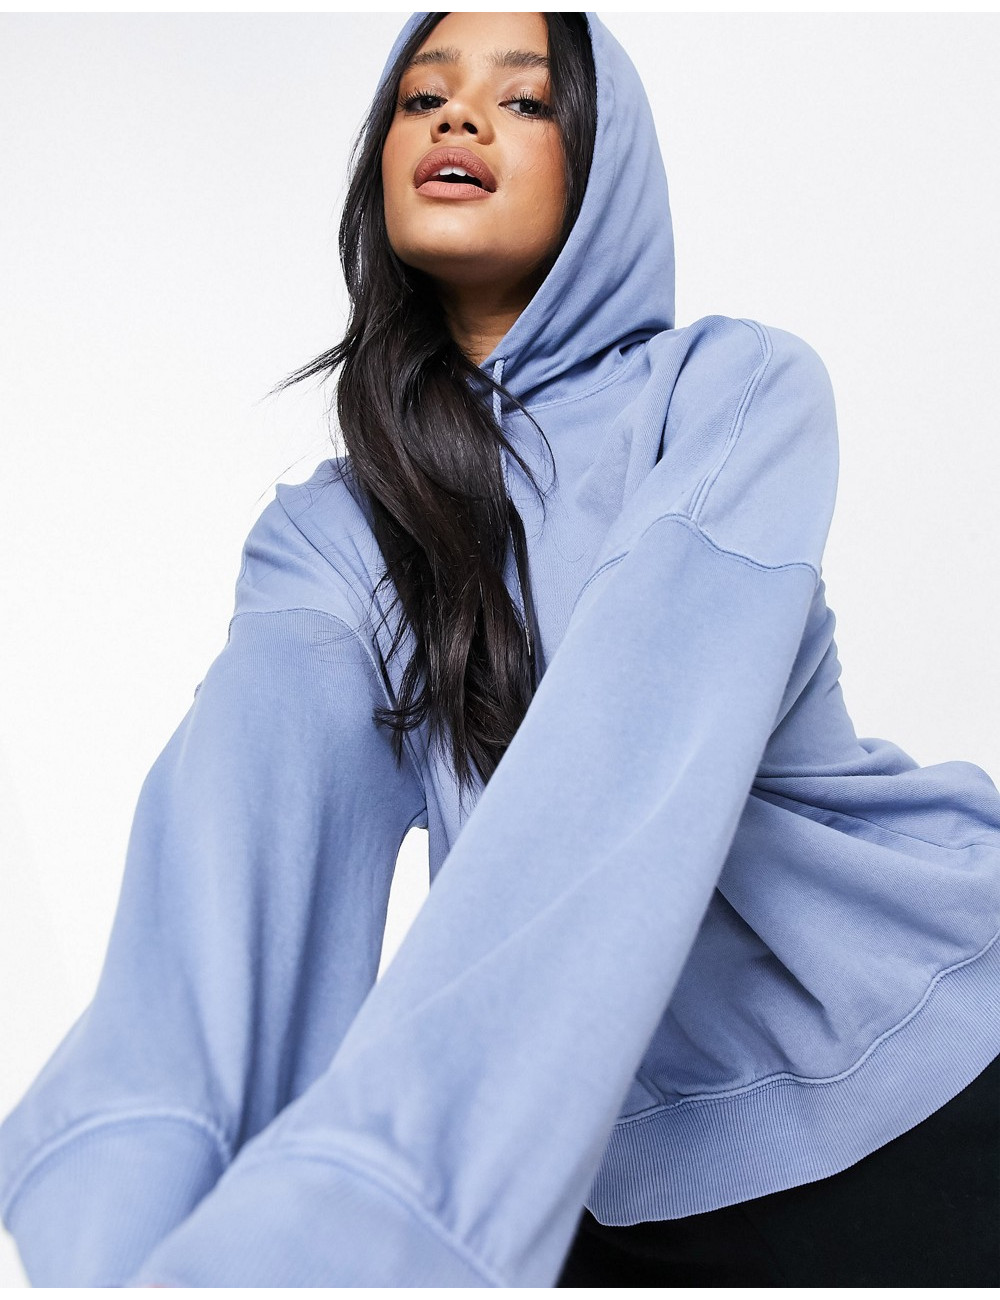 Cotton:On hoodie in blue